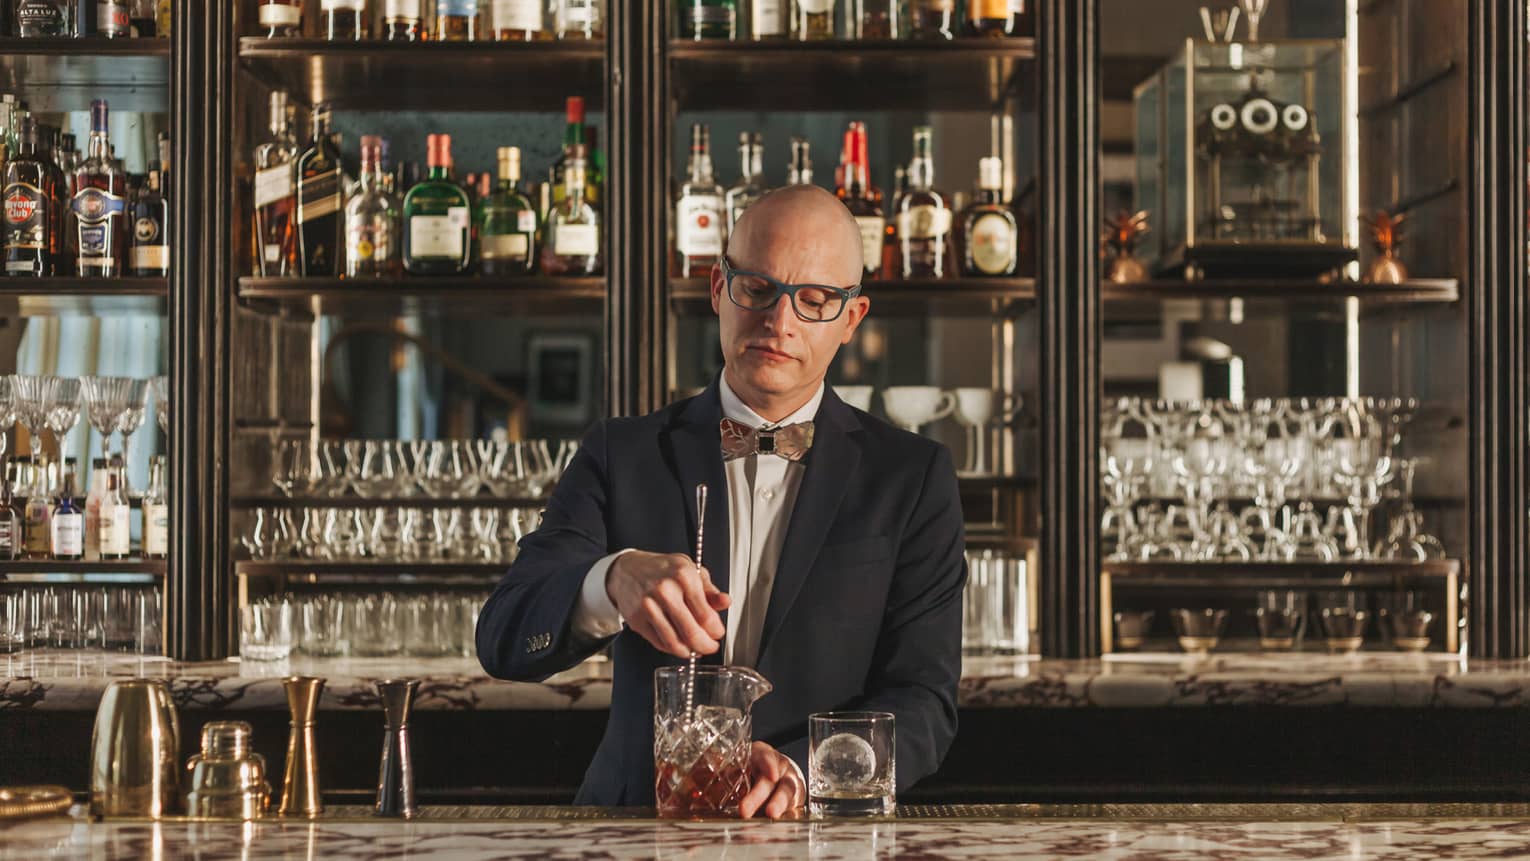 A bartender in a suit and bowtie stirring a drink with cabinets of liquor behind him.